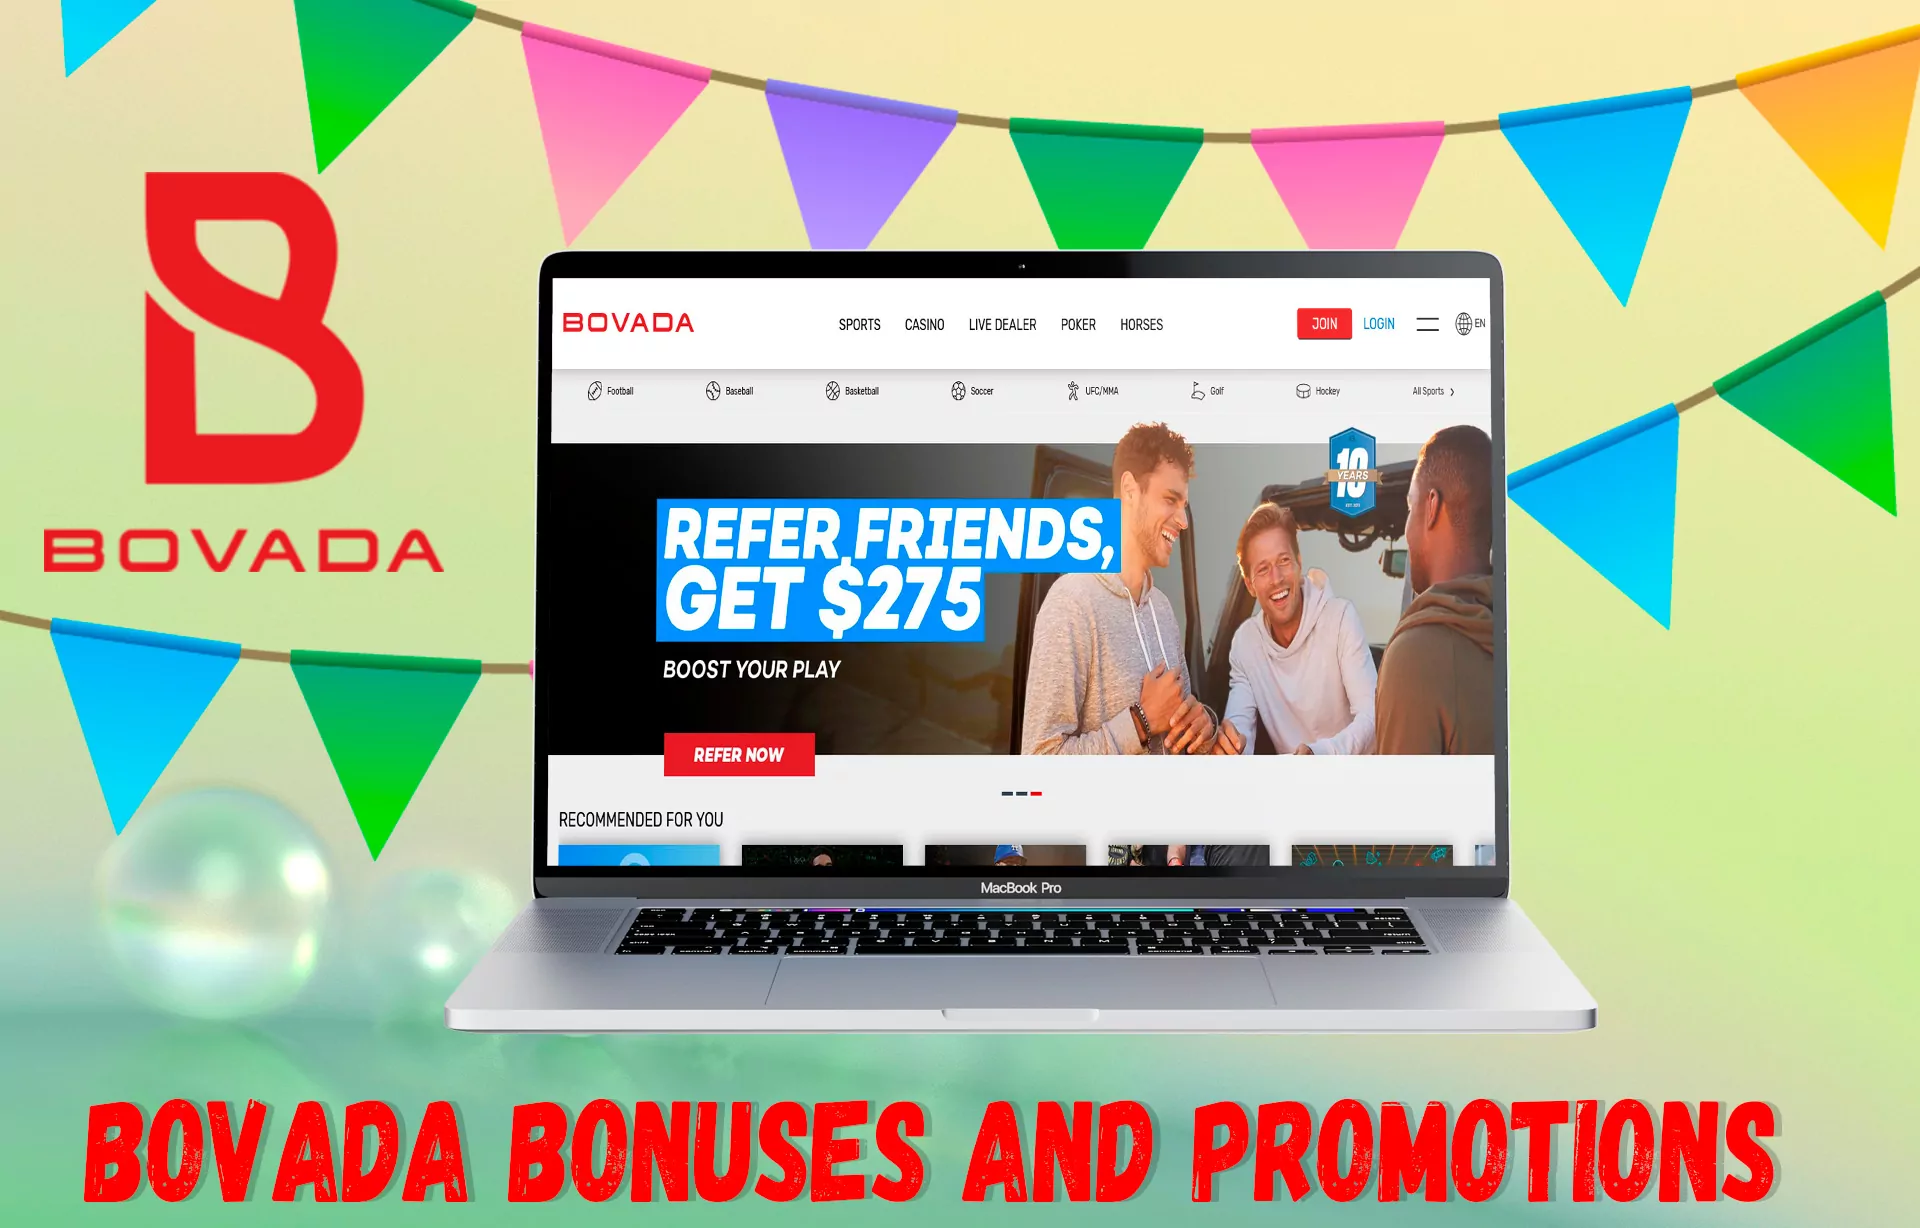 To get more pleasure from betting and make a profit in Bovada, various bonuses that are available in the application and site allow.